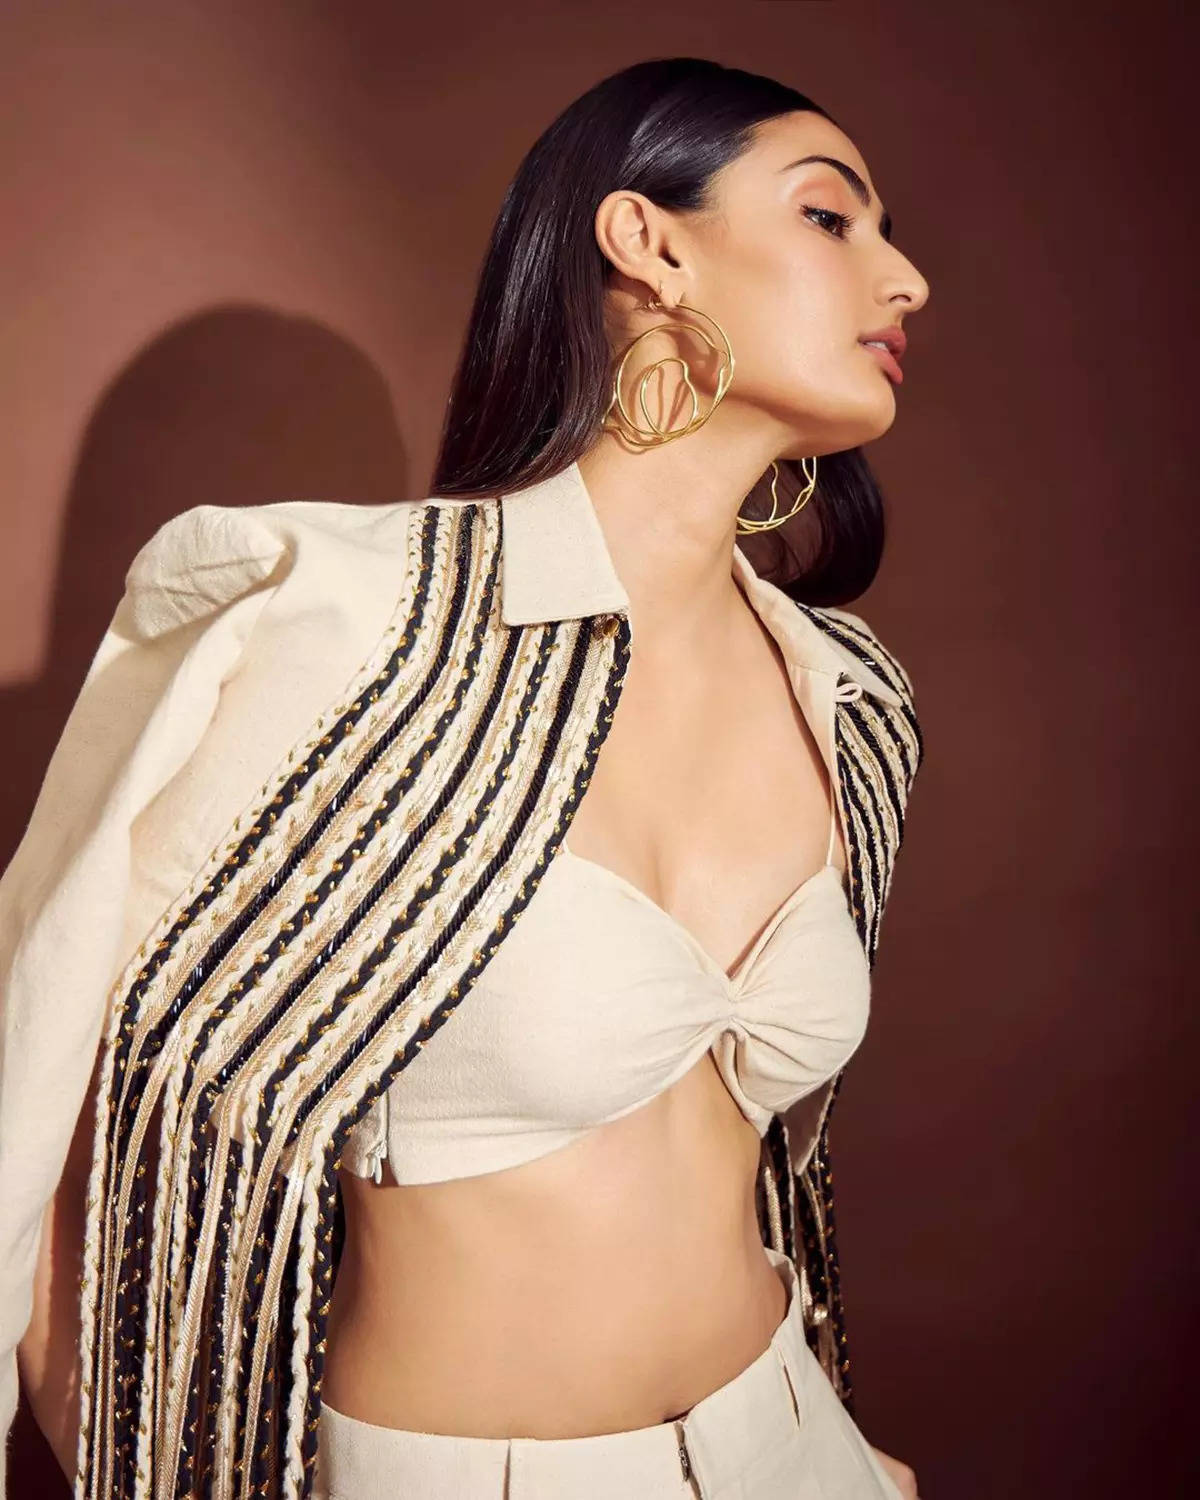 Suneil Shetty's daughter Athiya Shetty turns up the heat with her glamorous pictures